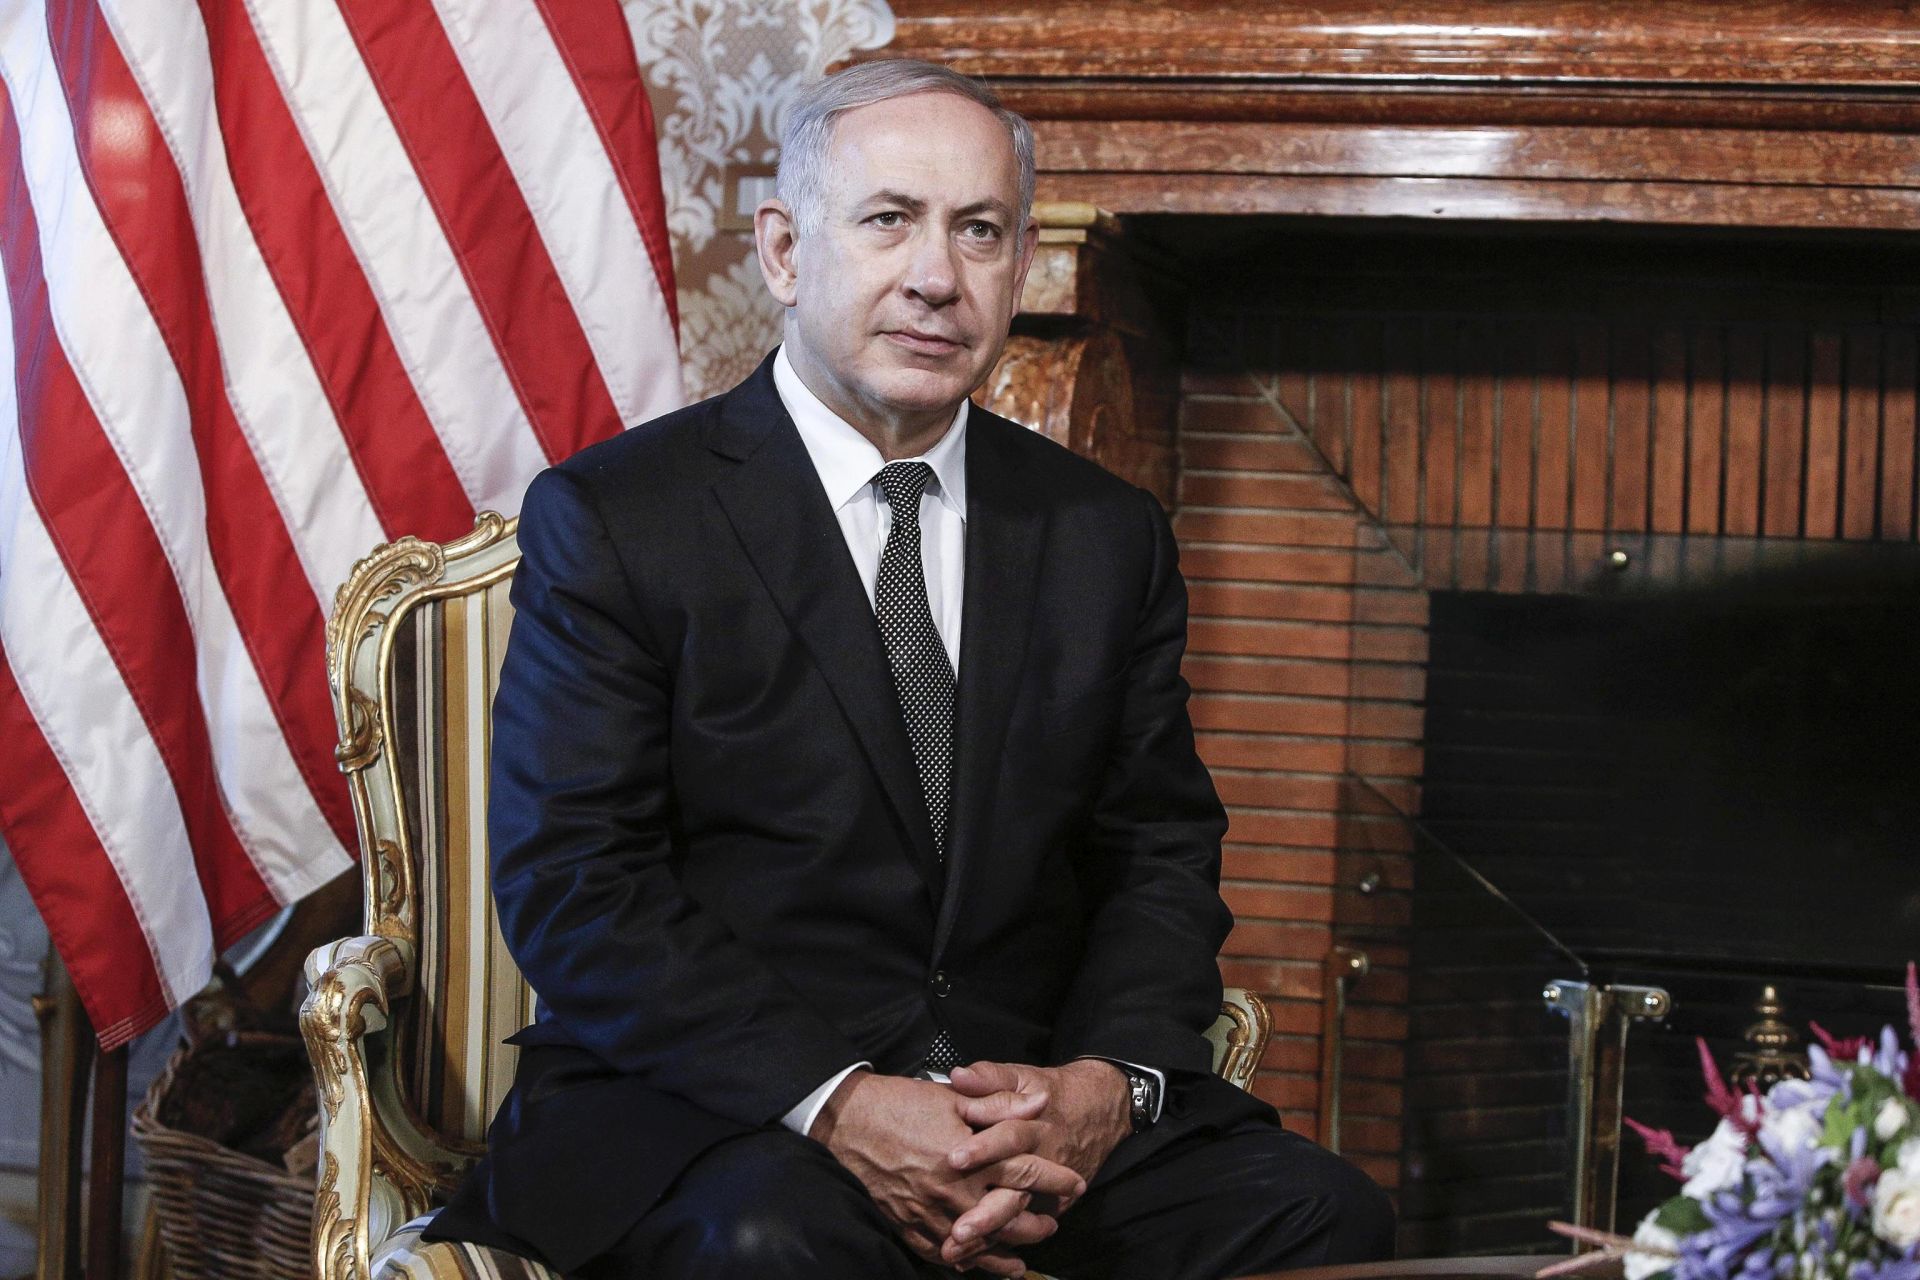 epa05393791 Prime Minister of Israel Benjamin Netanyahu during his meeting with United States Secretary of State John Kerry (not pictured) at Villa Taverna in Rome, Italy, 27 June 2016. Netanyahu met with Kerry to discuss normalizing Israel's ties with Turkey after a six year conflict over a disagreement regarding the killing of 10 pro-Palestinian Turkish activist by Israeli soldiers after the Turkish Mavi Marmara flotilla breached Gaza's naval blockade in 2010.  EPA/GIUSEPPE LAMI